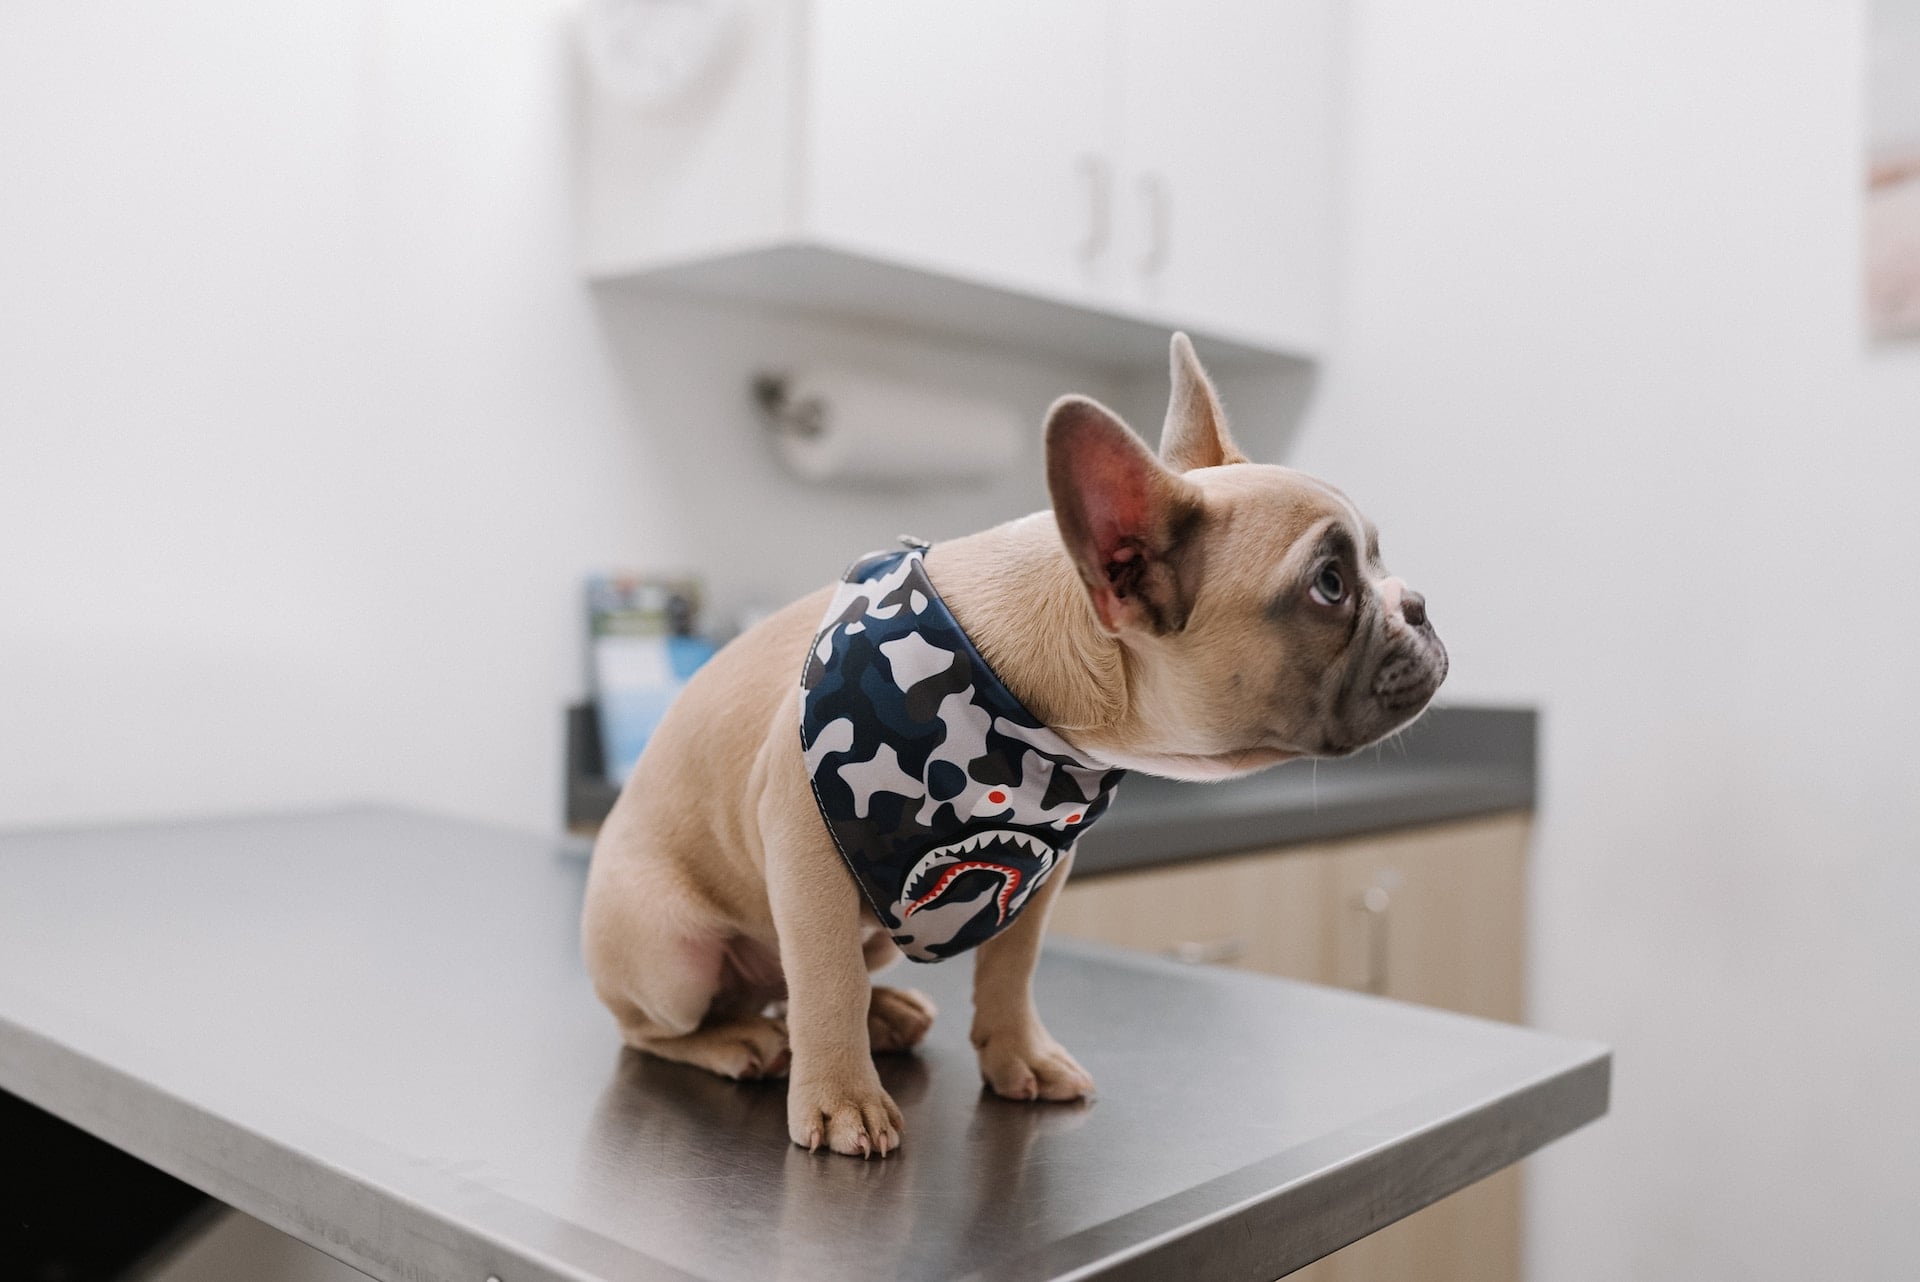 Female French Bulldog Puppies: What You Need To Know